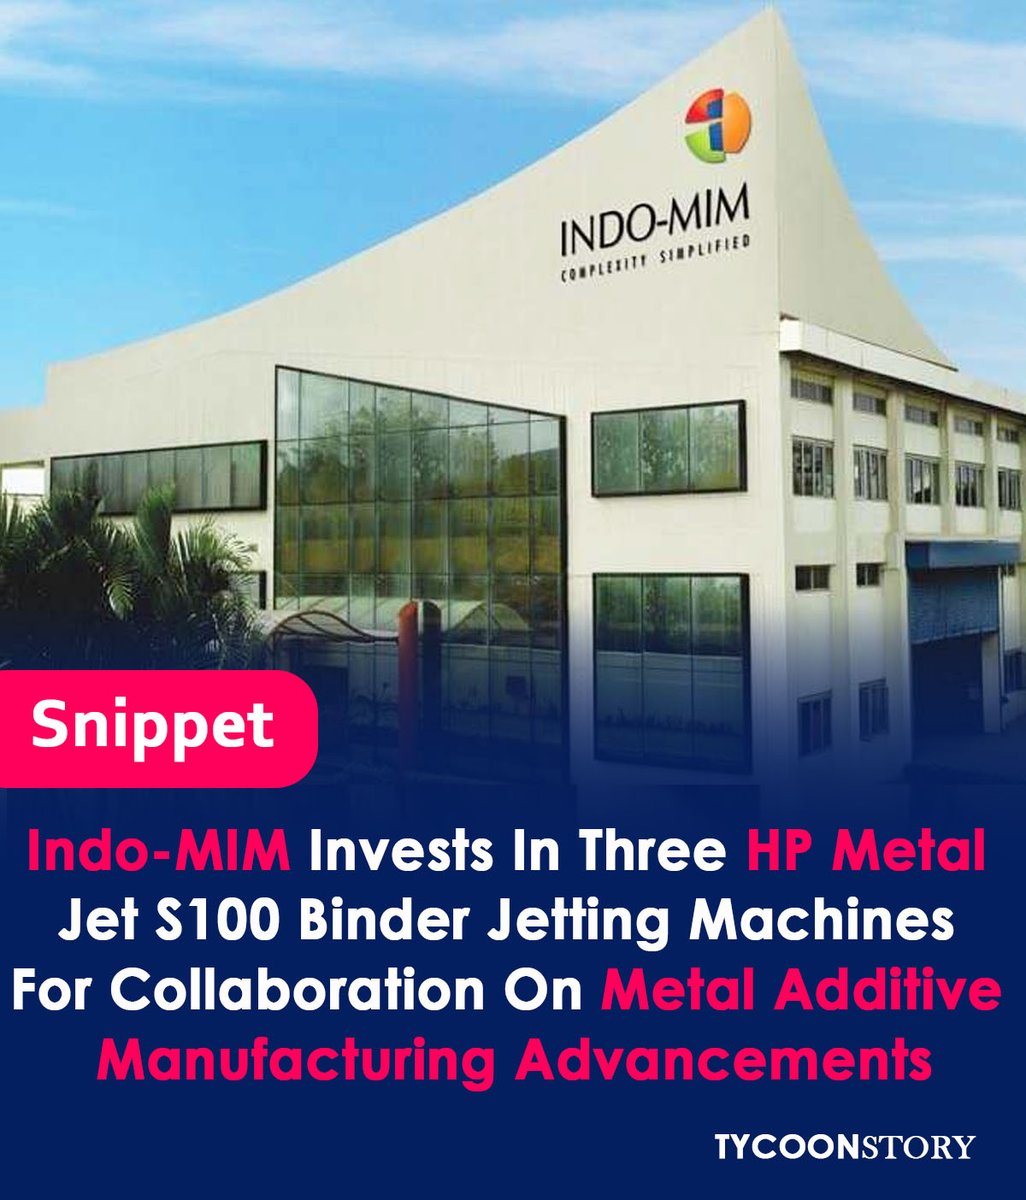 Indo-MIM invests in three HP Metal Jet S100 machines through strategic partnership

#hp #metaljet #additivemanufacturing #3dprinting #newmaterials #metaladditivemanufacturing #HPmetaljet #metal3dprinting #manufacturing #application #technology @HP